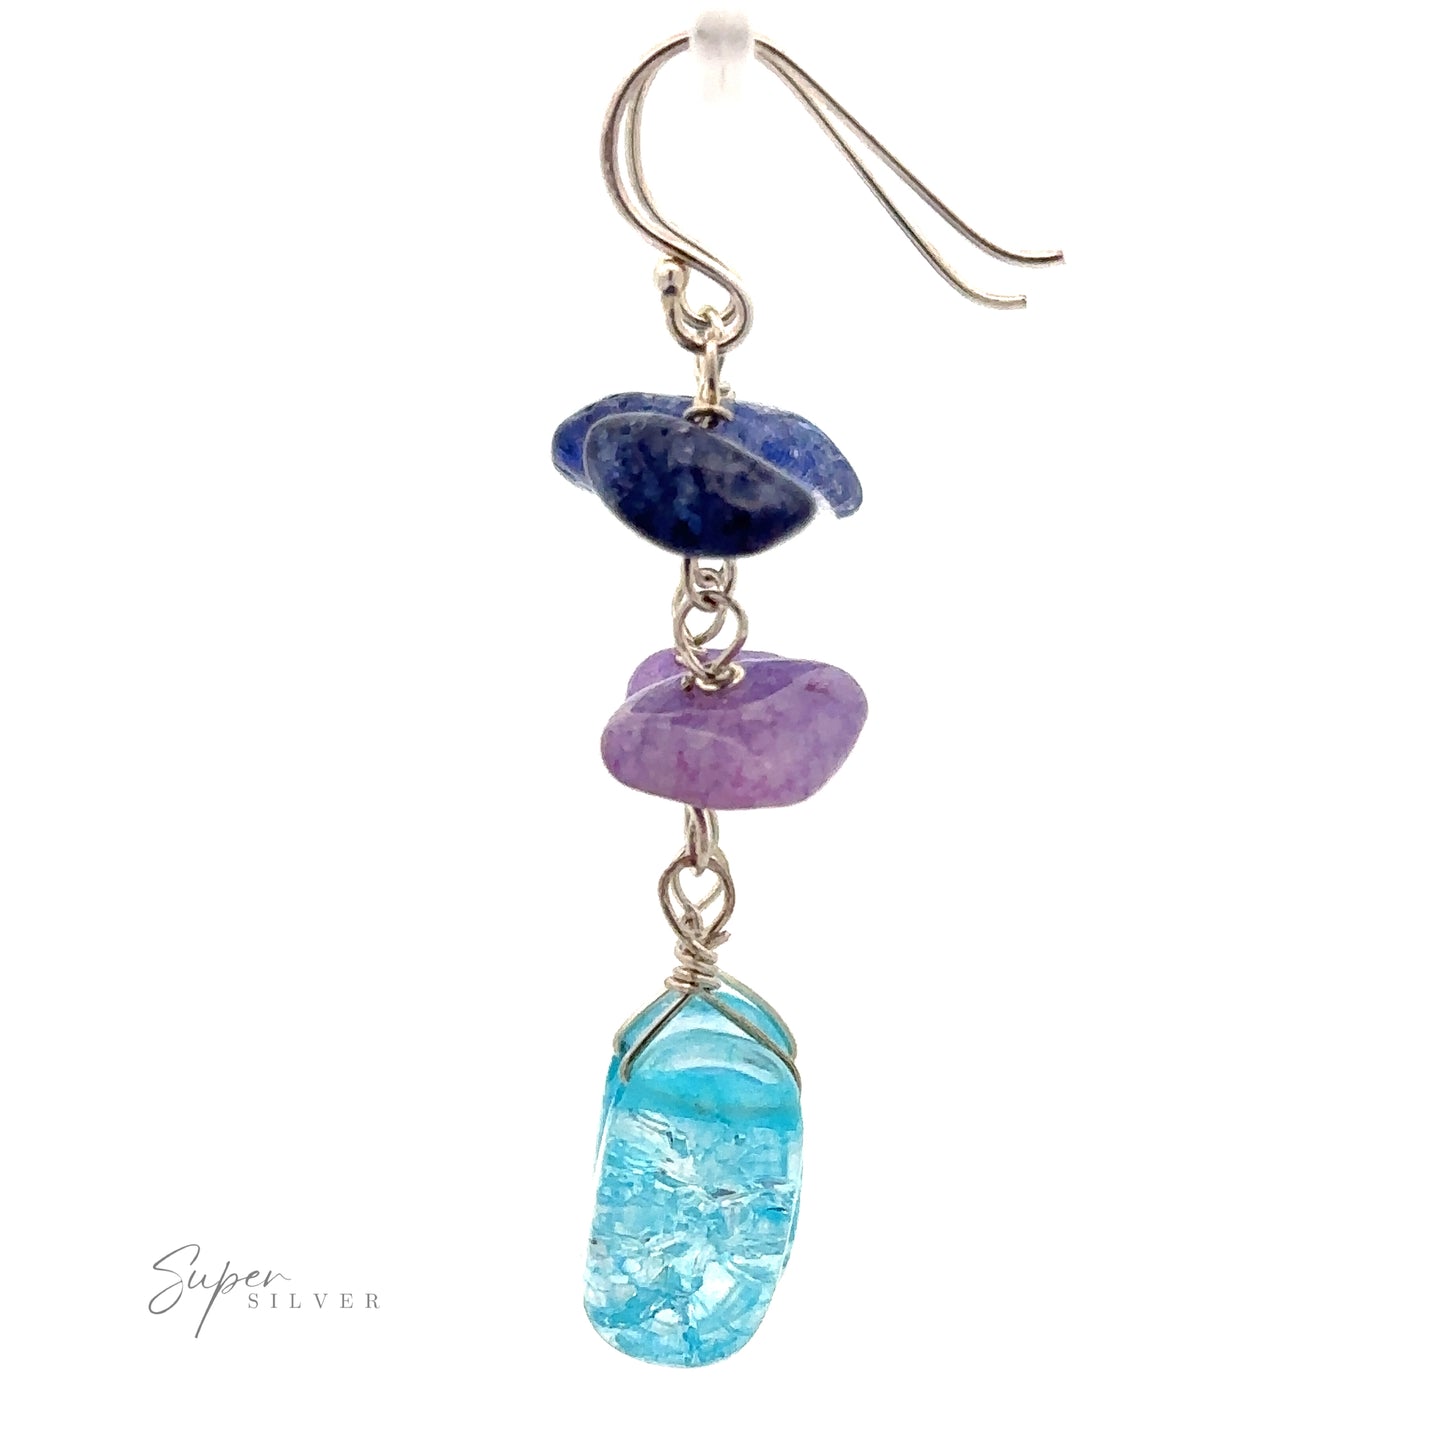 
                  
                    A Beaded Blue and Purple Earrings featuring three stones in a vertical arrangement: a bright blue bead at the top, a purple stone in the middle, and a translucent turquoise stone at the bottom.
                  
                